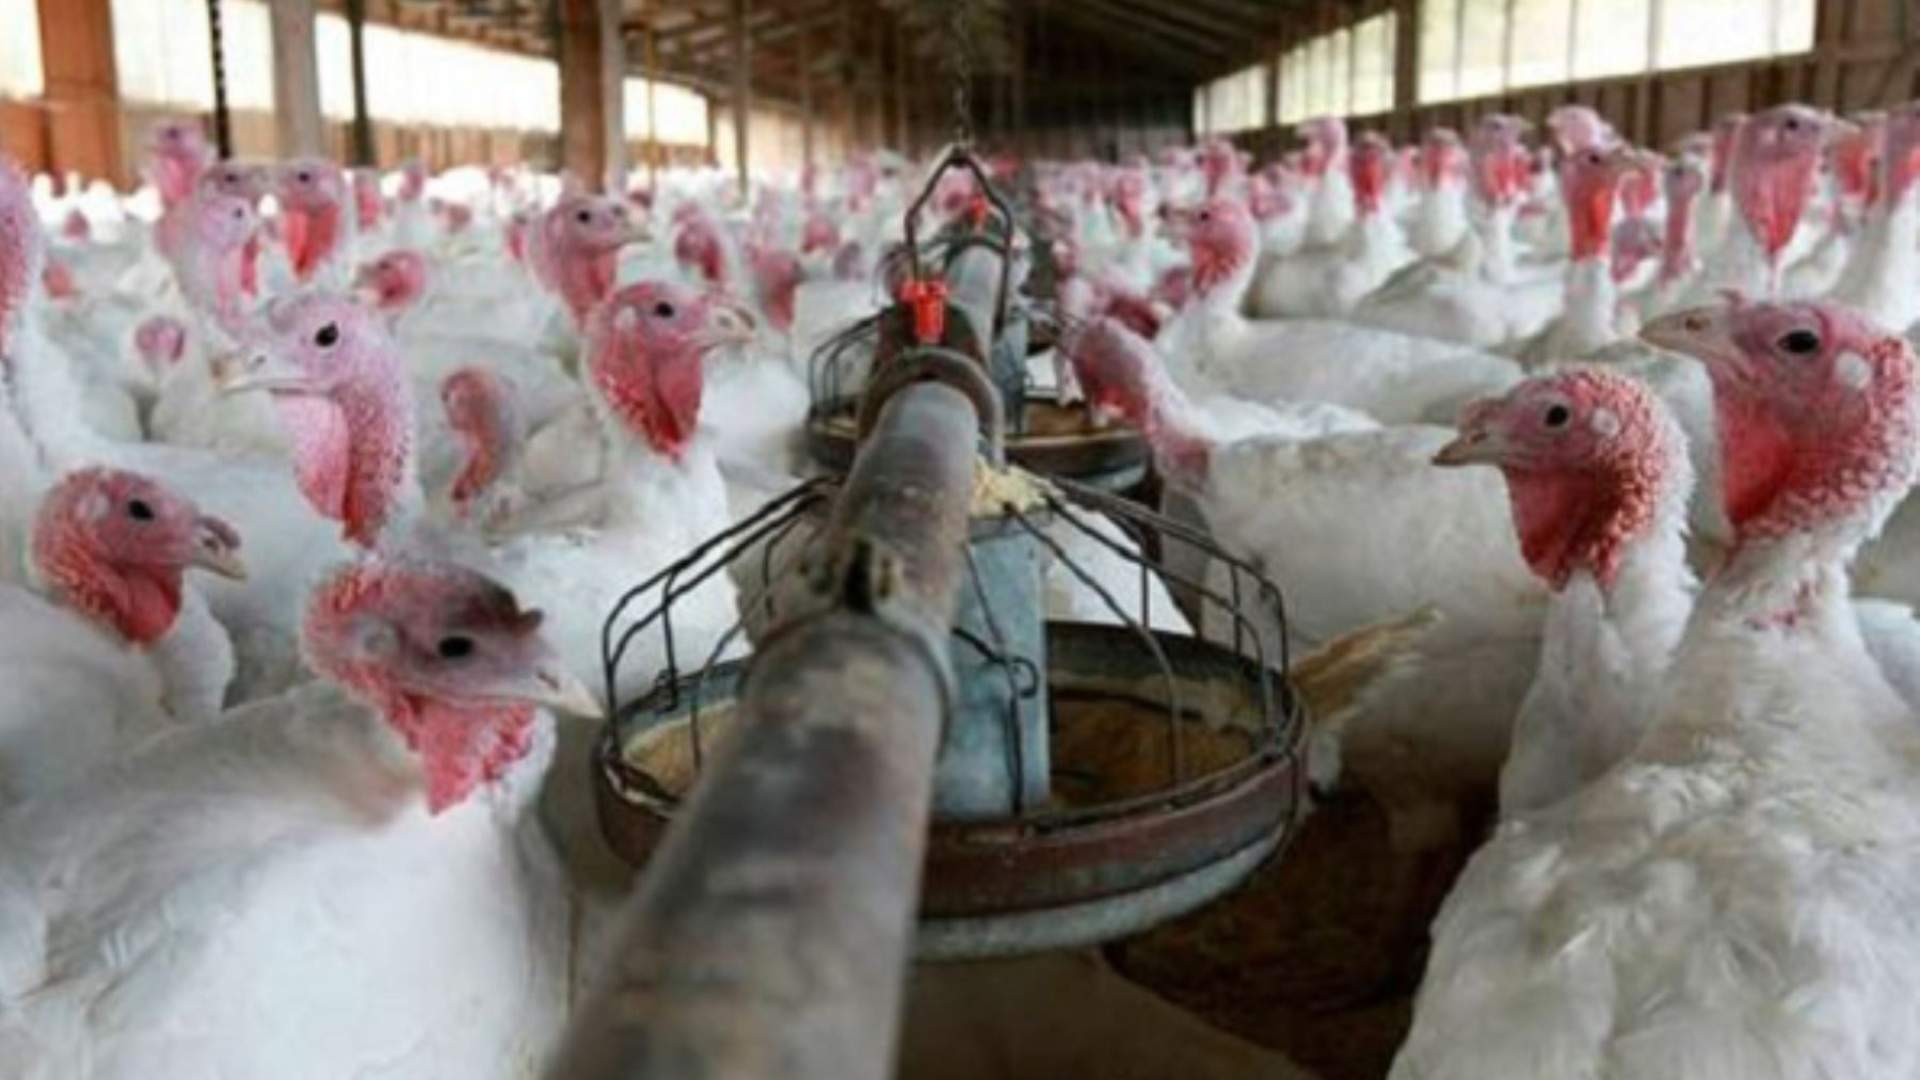 Avian flu: Senasa's prohibitions in the midst of the health emergency